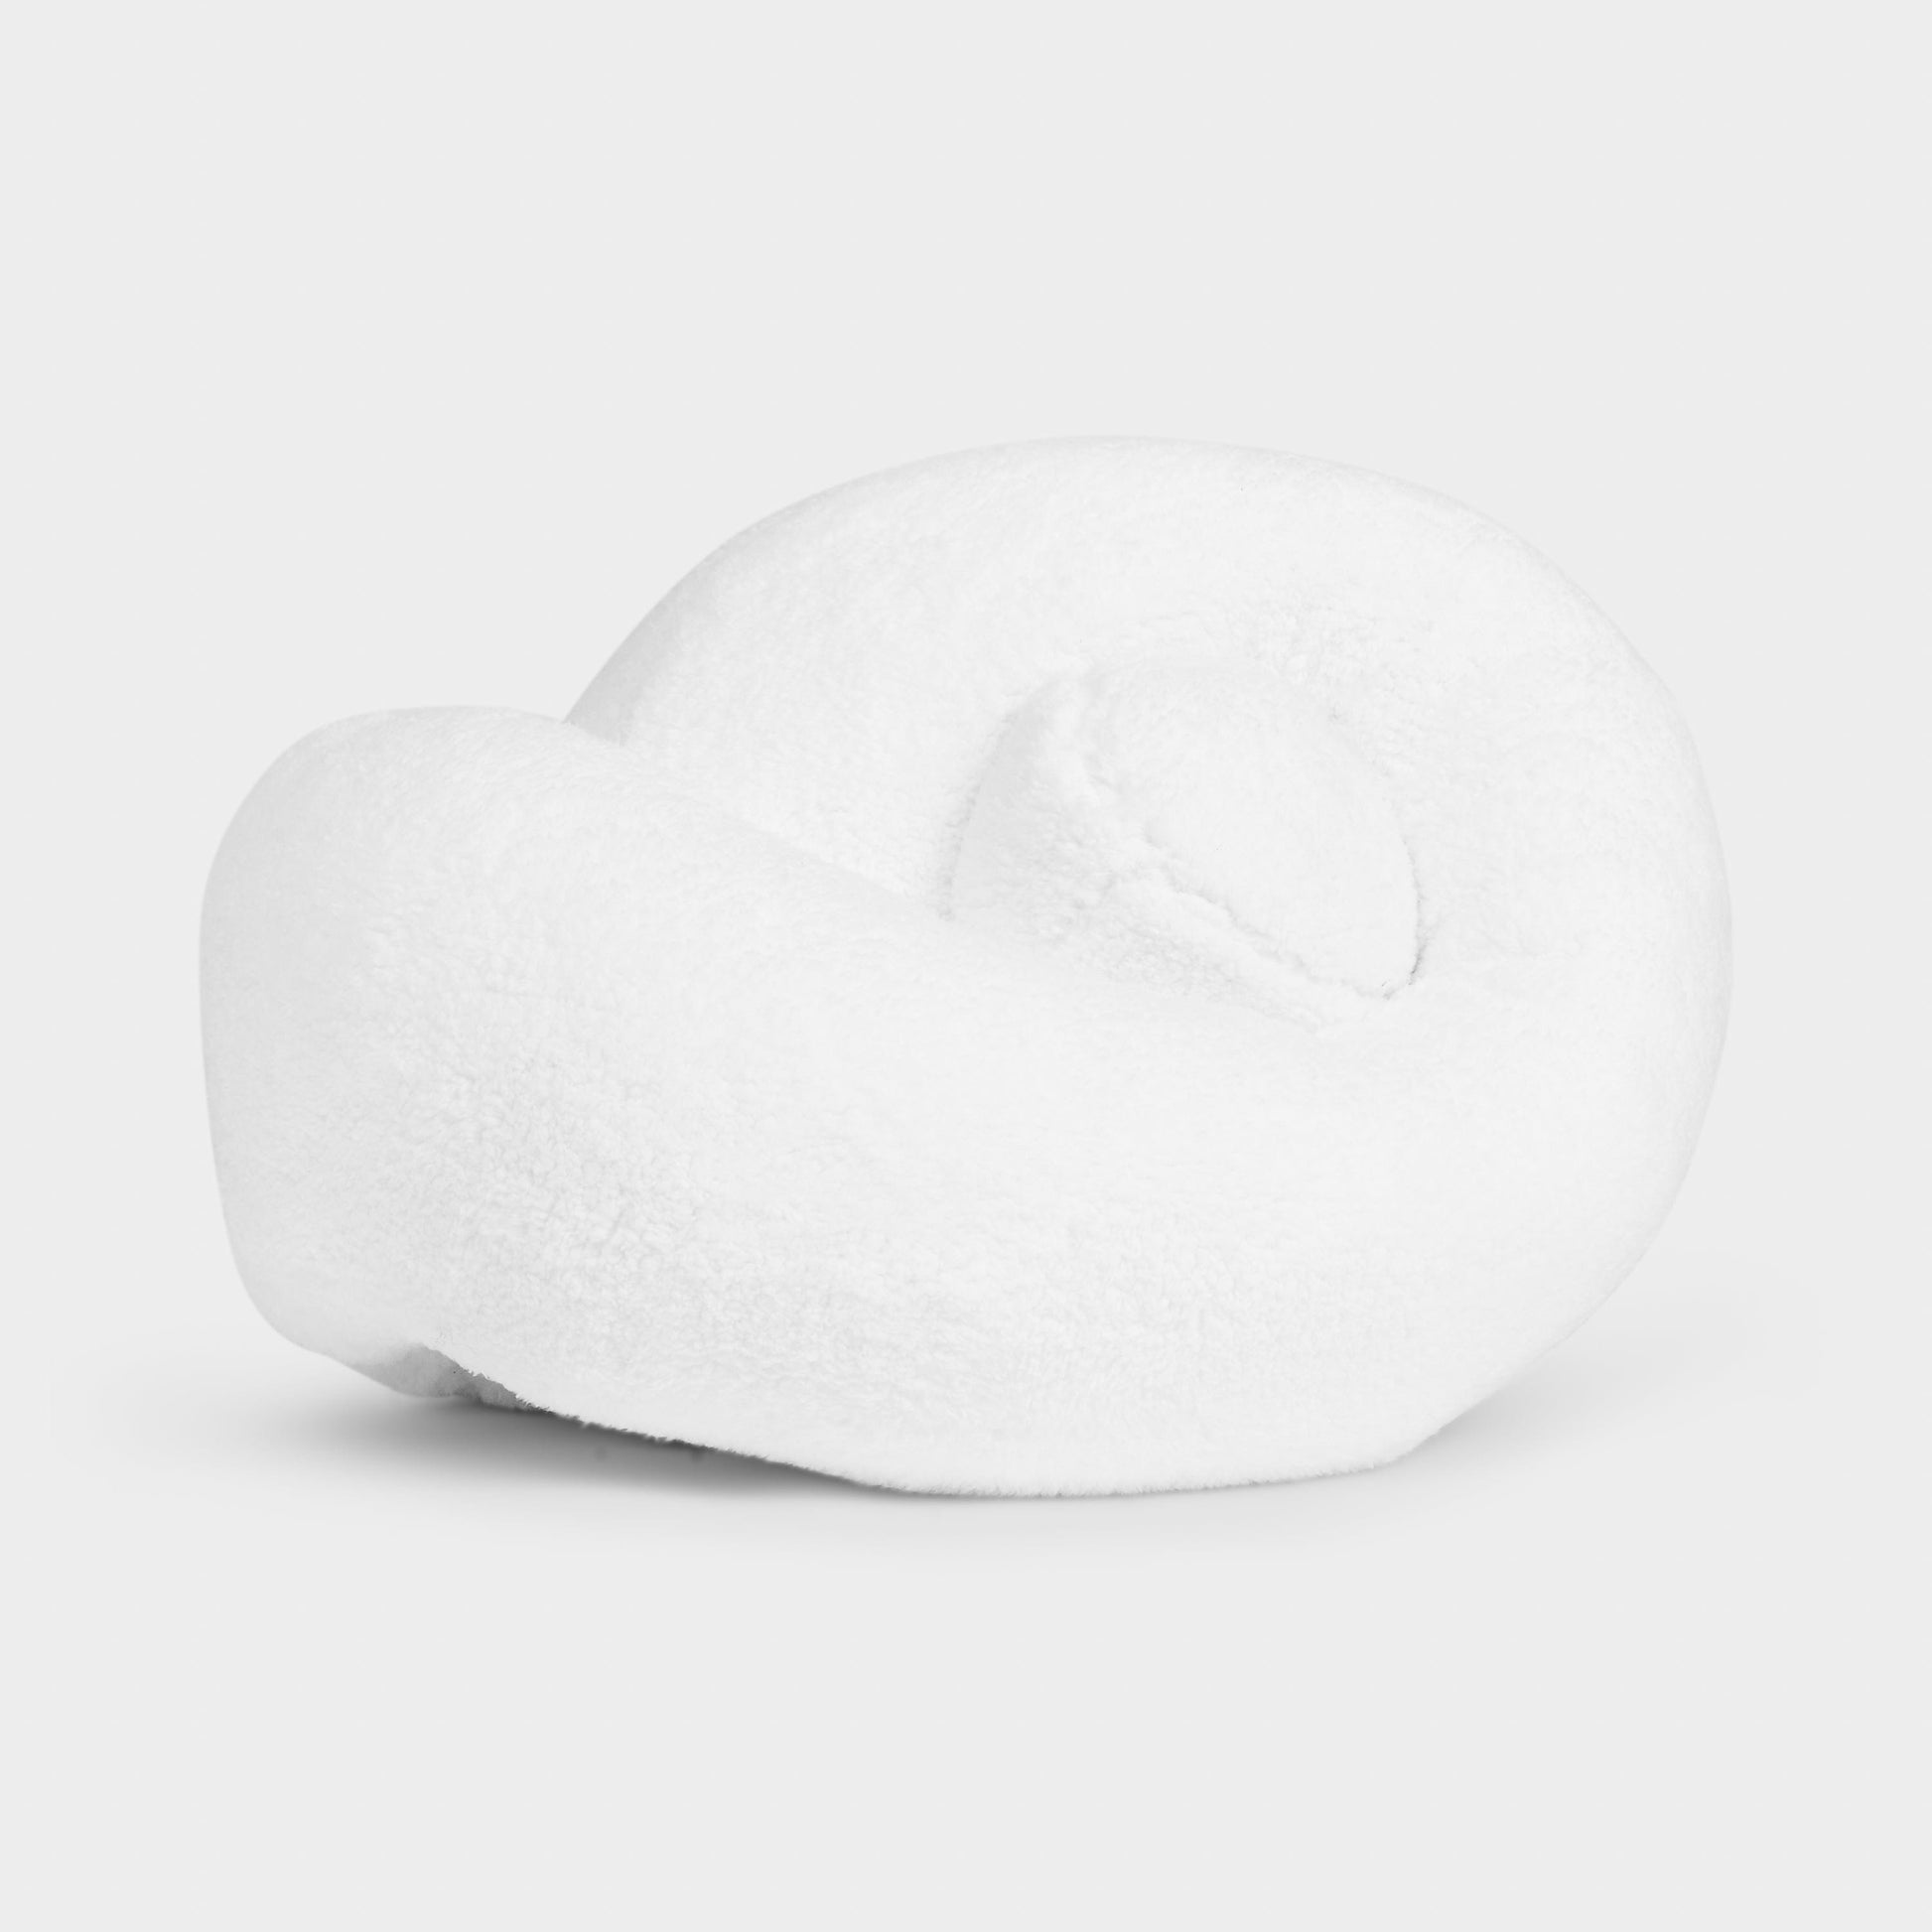 Pregnancy Pillow For Body Support & Recovery - By Ethical Bedding